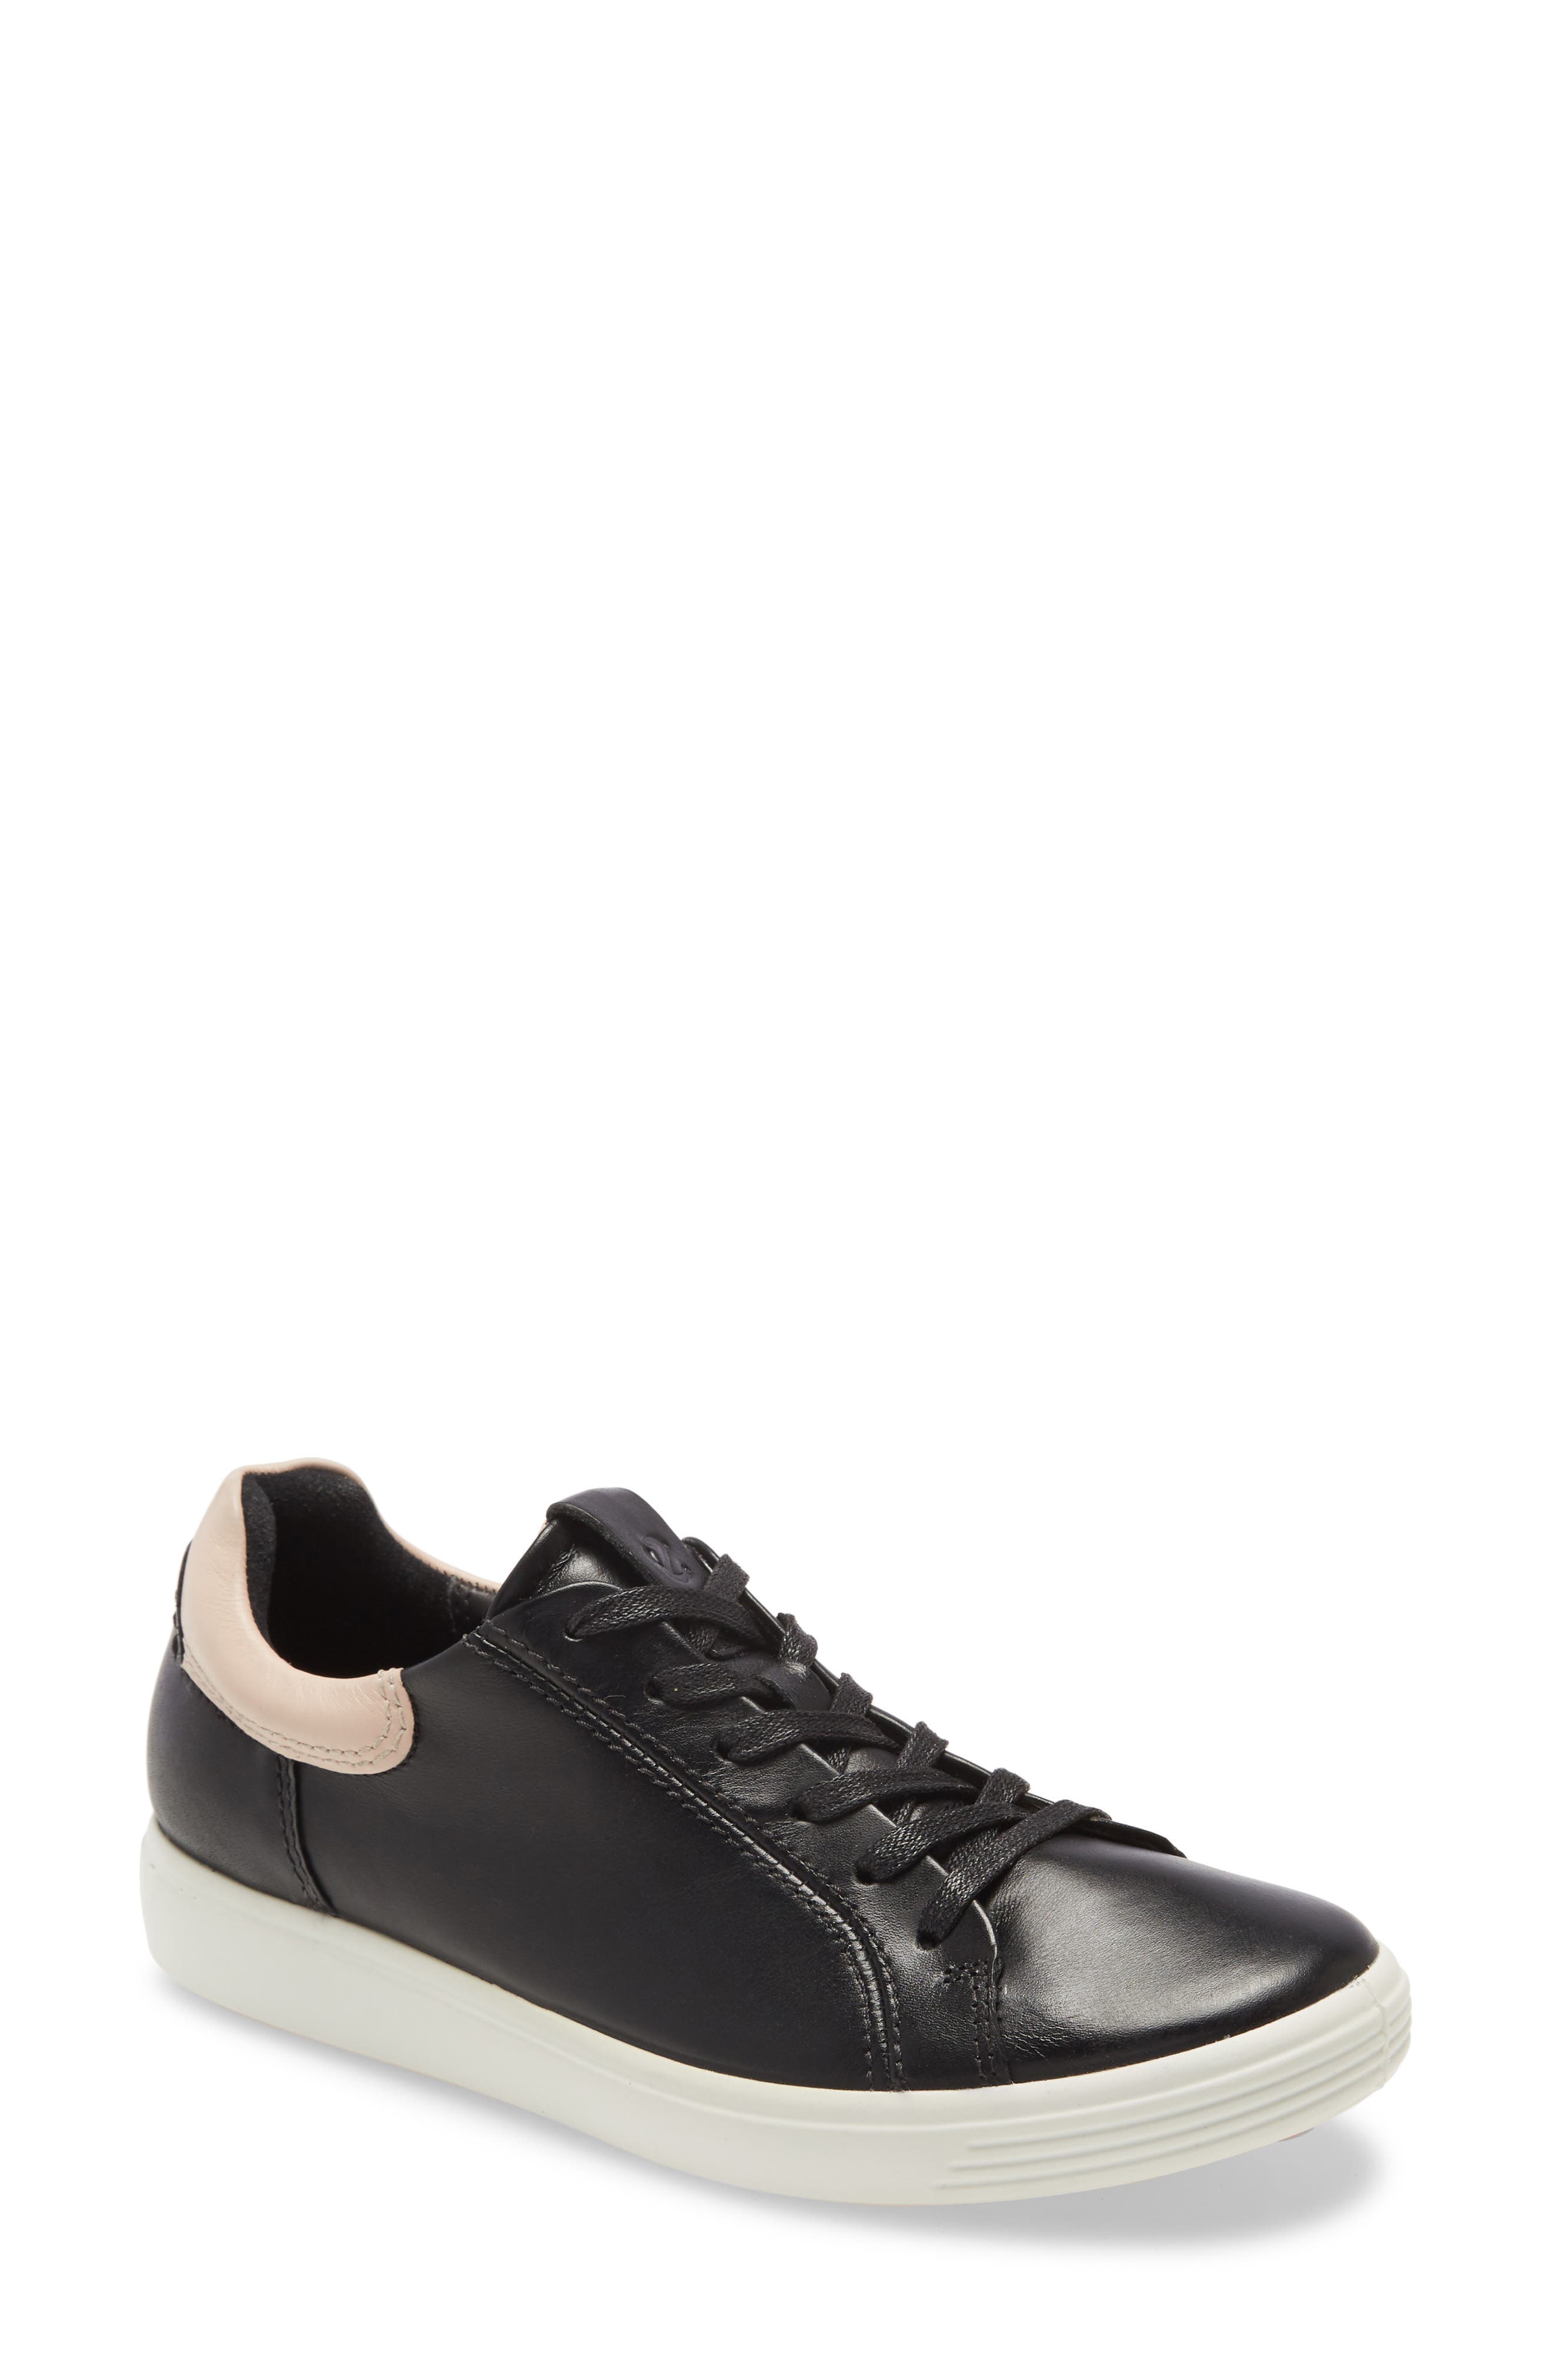 ecco black leather sneakers womens